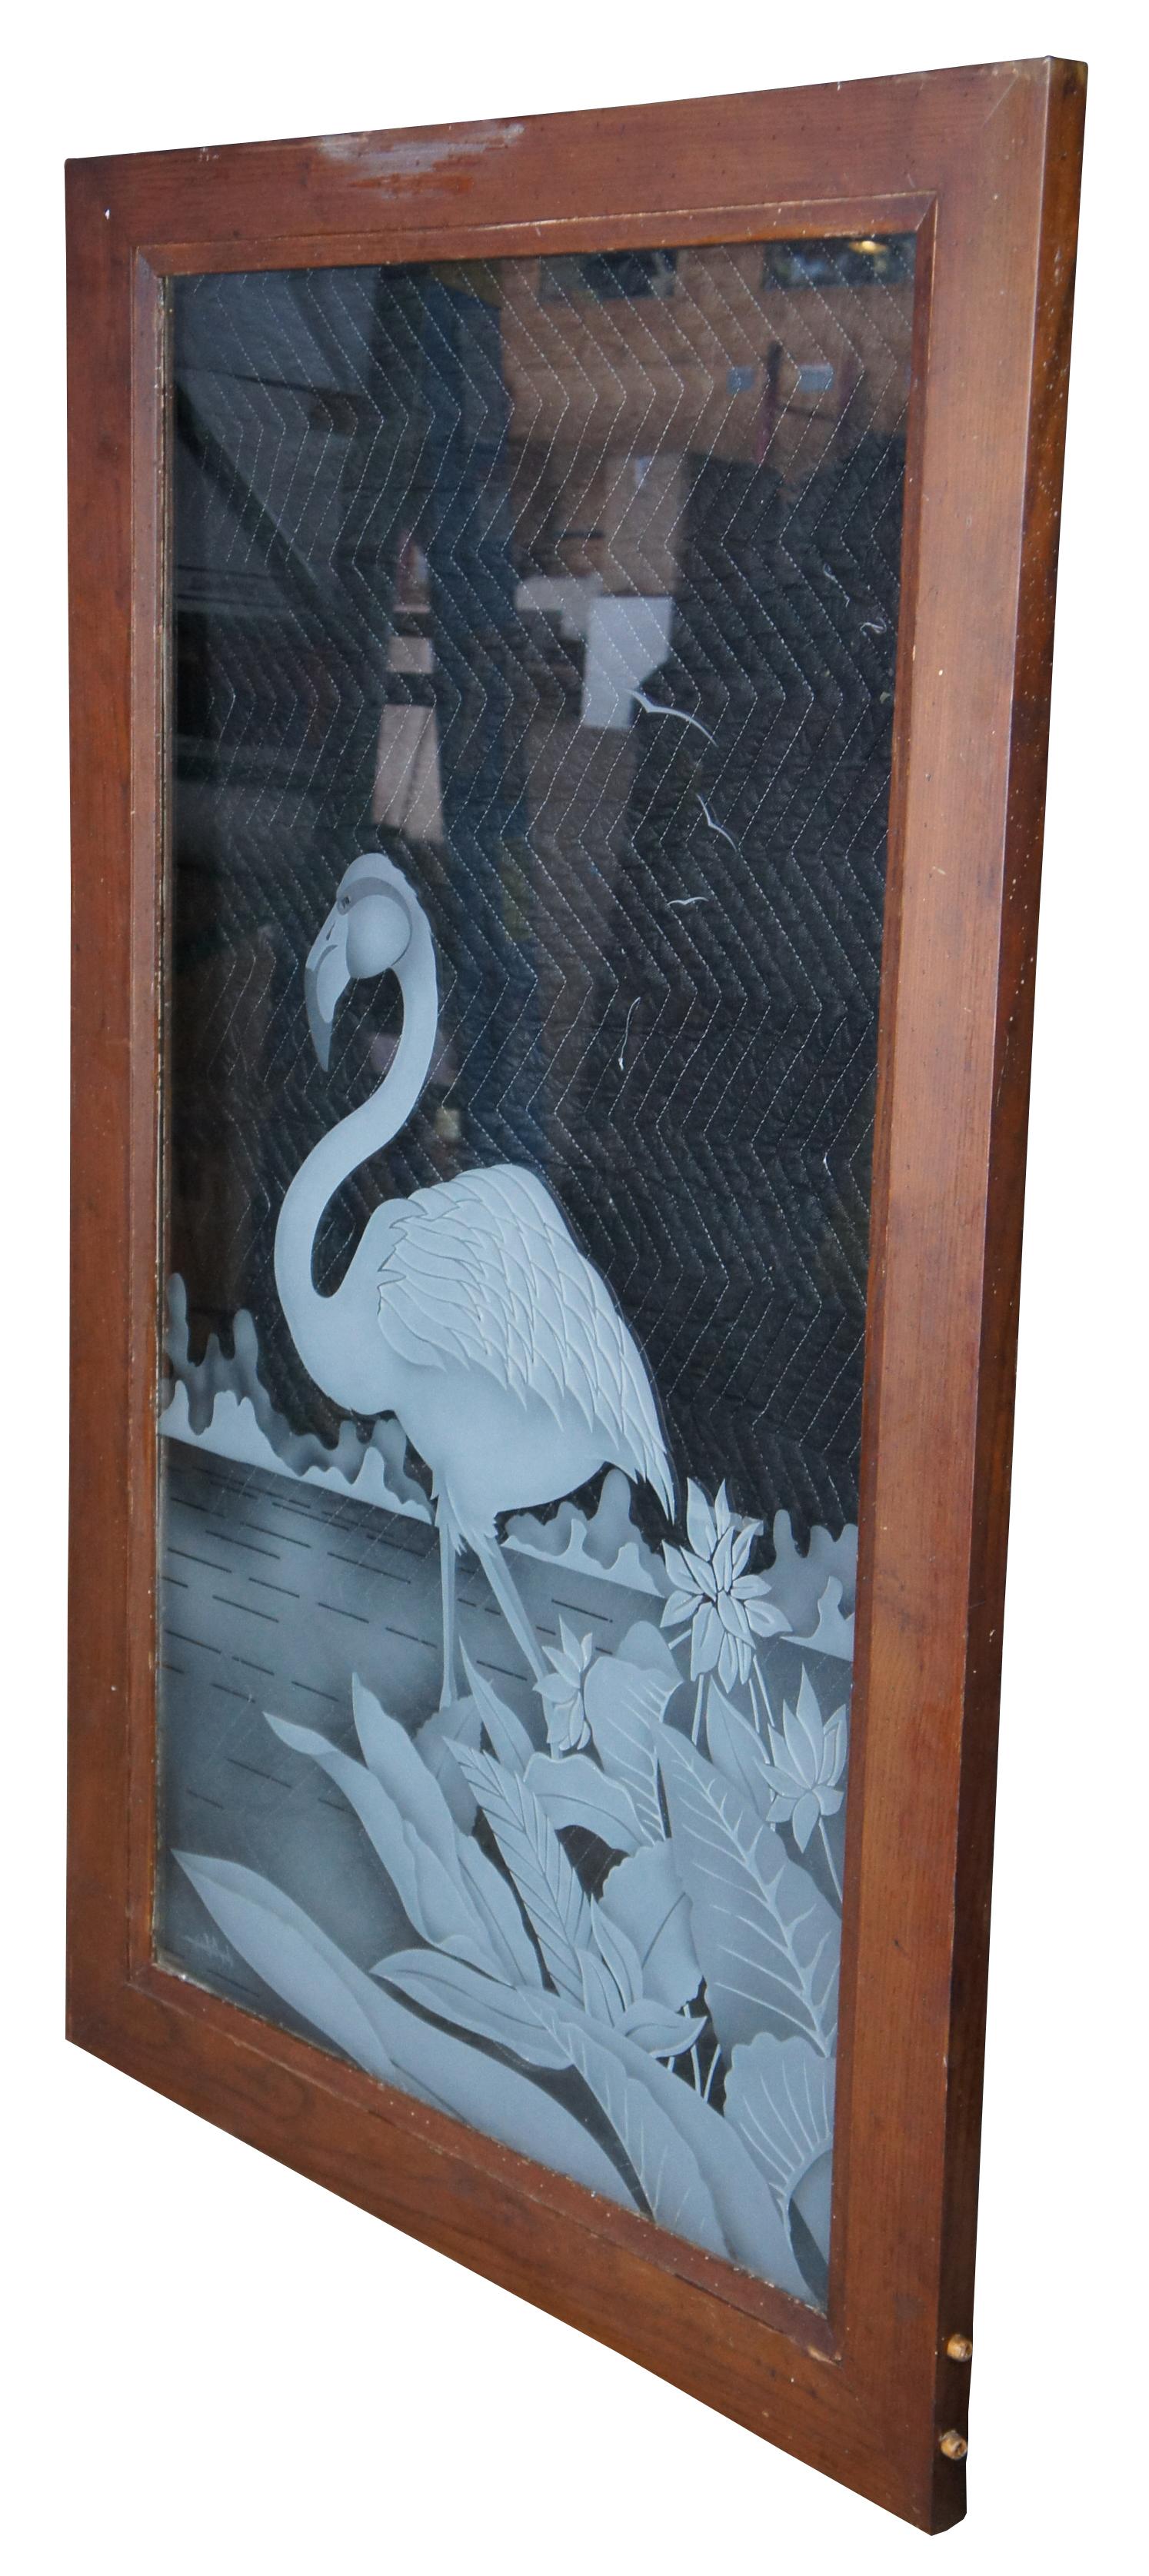 Vintage etched art glass cabinet door or window panel featuring a Flamingo, by Jorge B. Rodriguez. Measures: 56